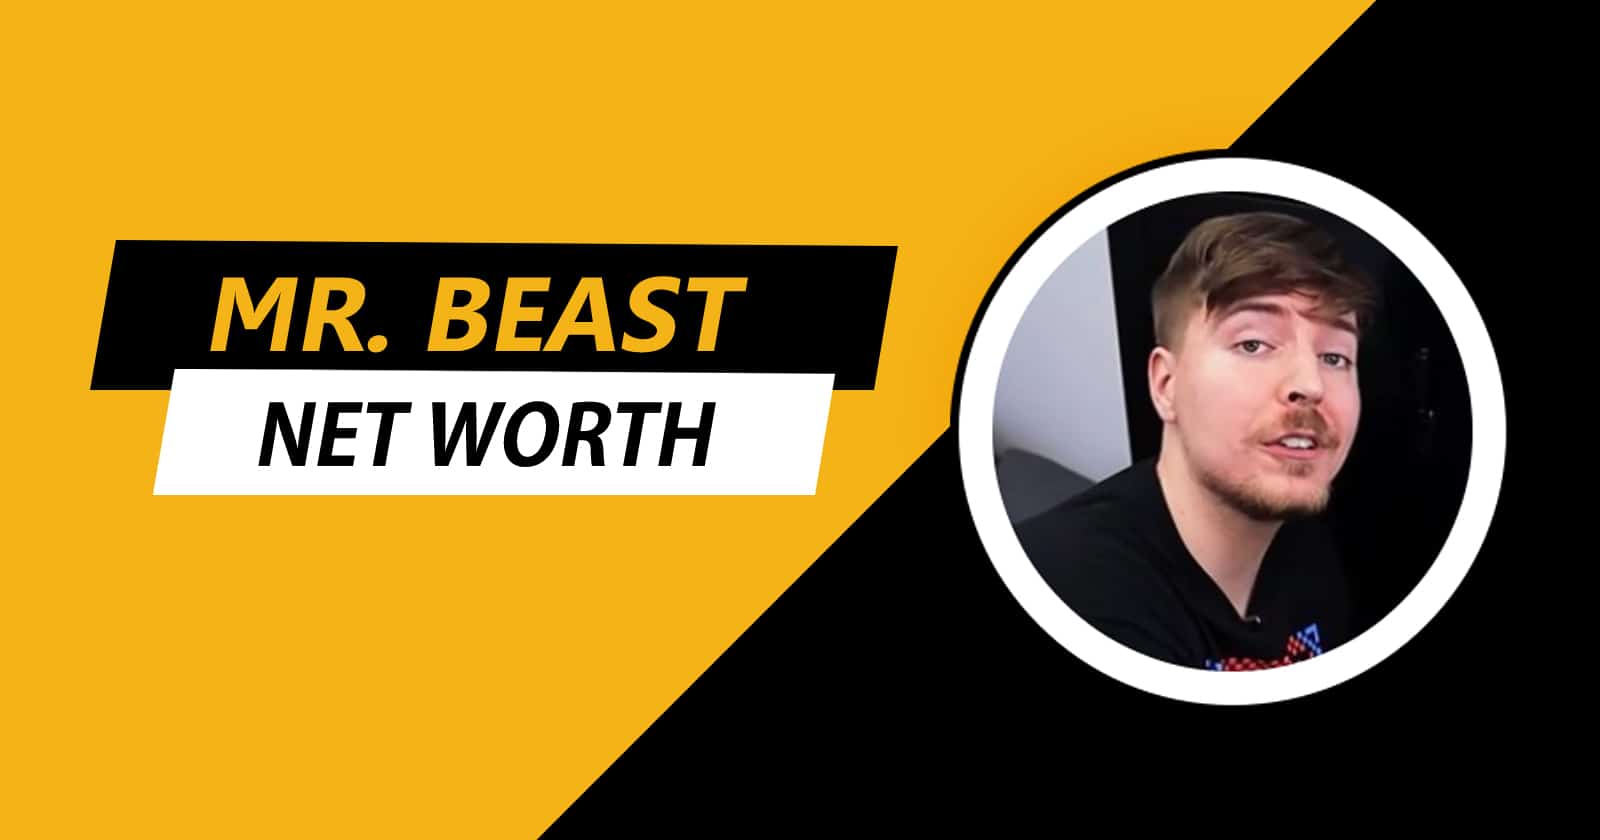 What is MrBeast Net Worth? Jimmy Donaldson's Net Worth, Explained